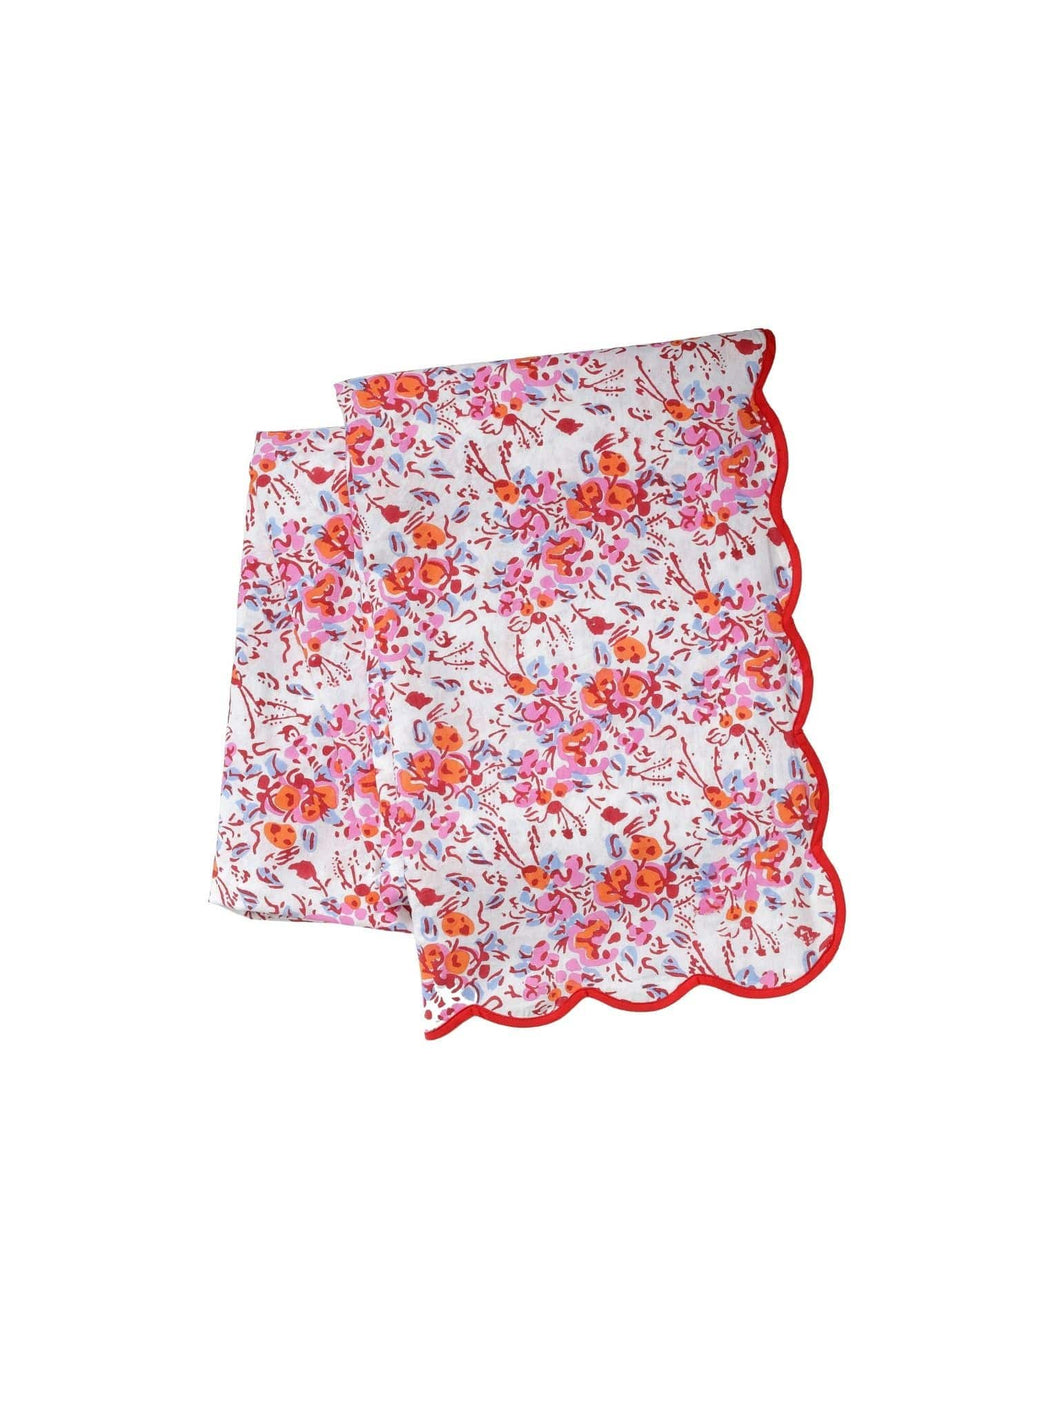 Pink Floral Scalloped Tablecloth